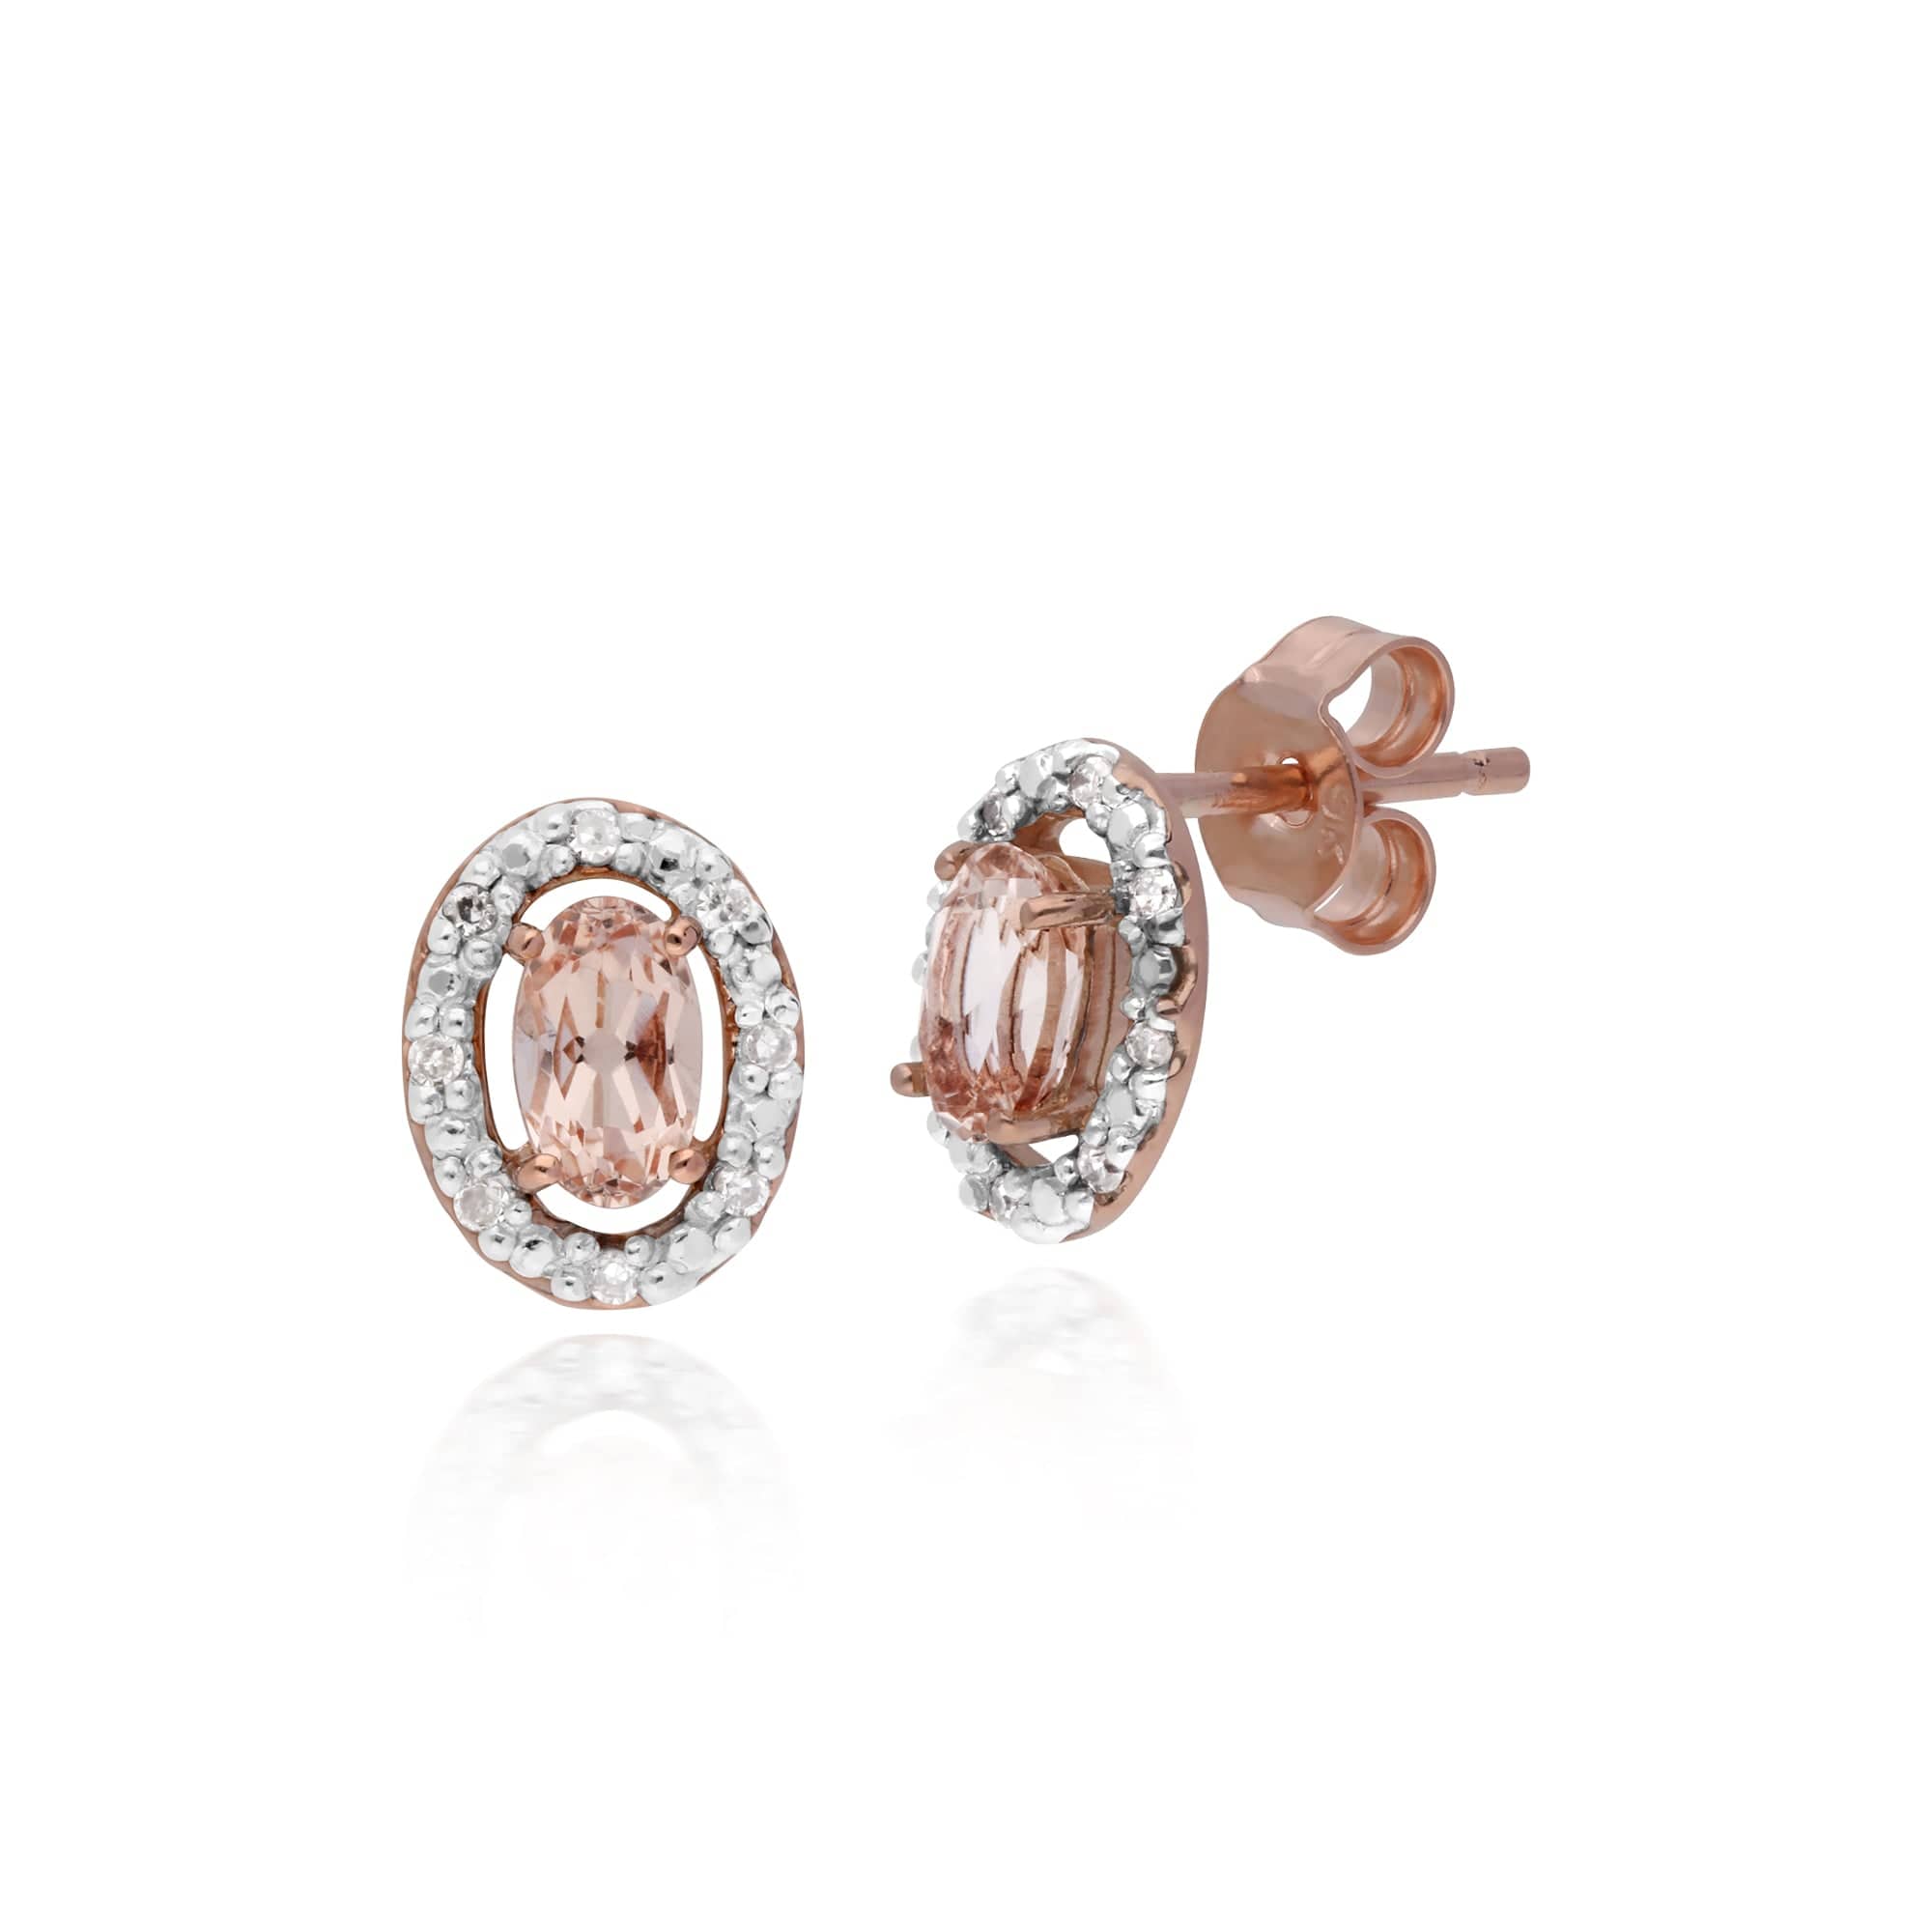 135E1451019-135R1589019 Classic Oval Morganite & Diamond Halo Stud Earrings & Solitaire Ring Set in 9ct Rose Gold 2